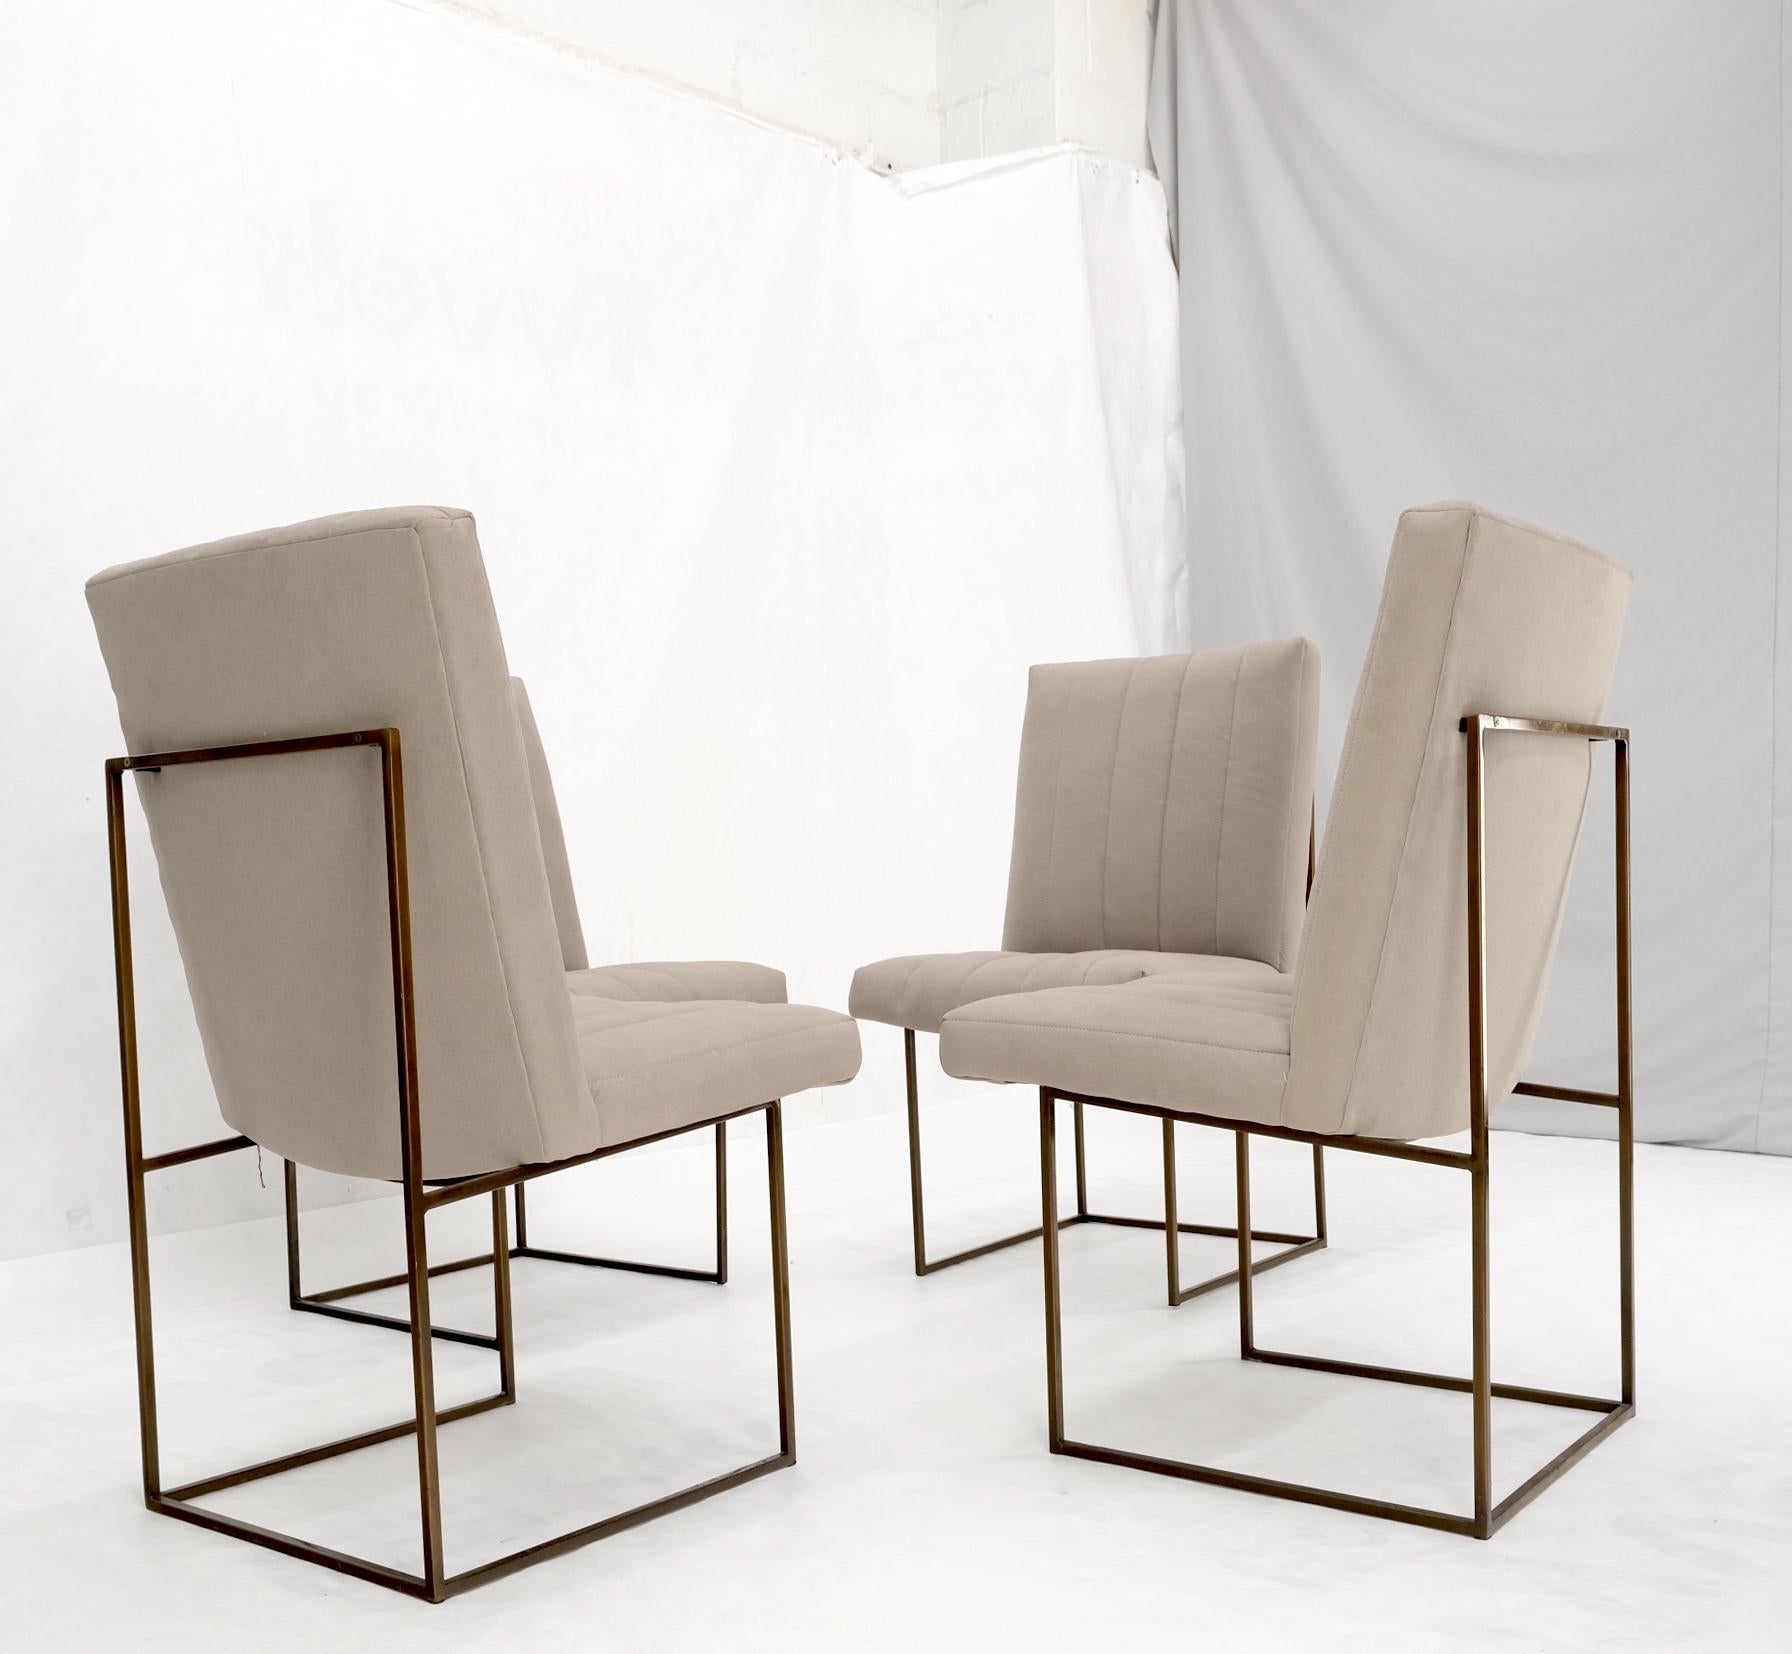 Set of 4 Milo Baughman Mid-Century Modern Dining Chairs New Alcantera Upholstery For Sale 6